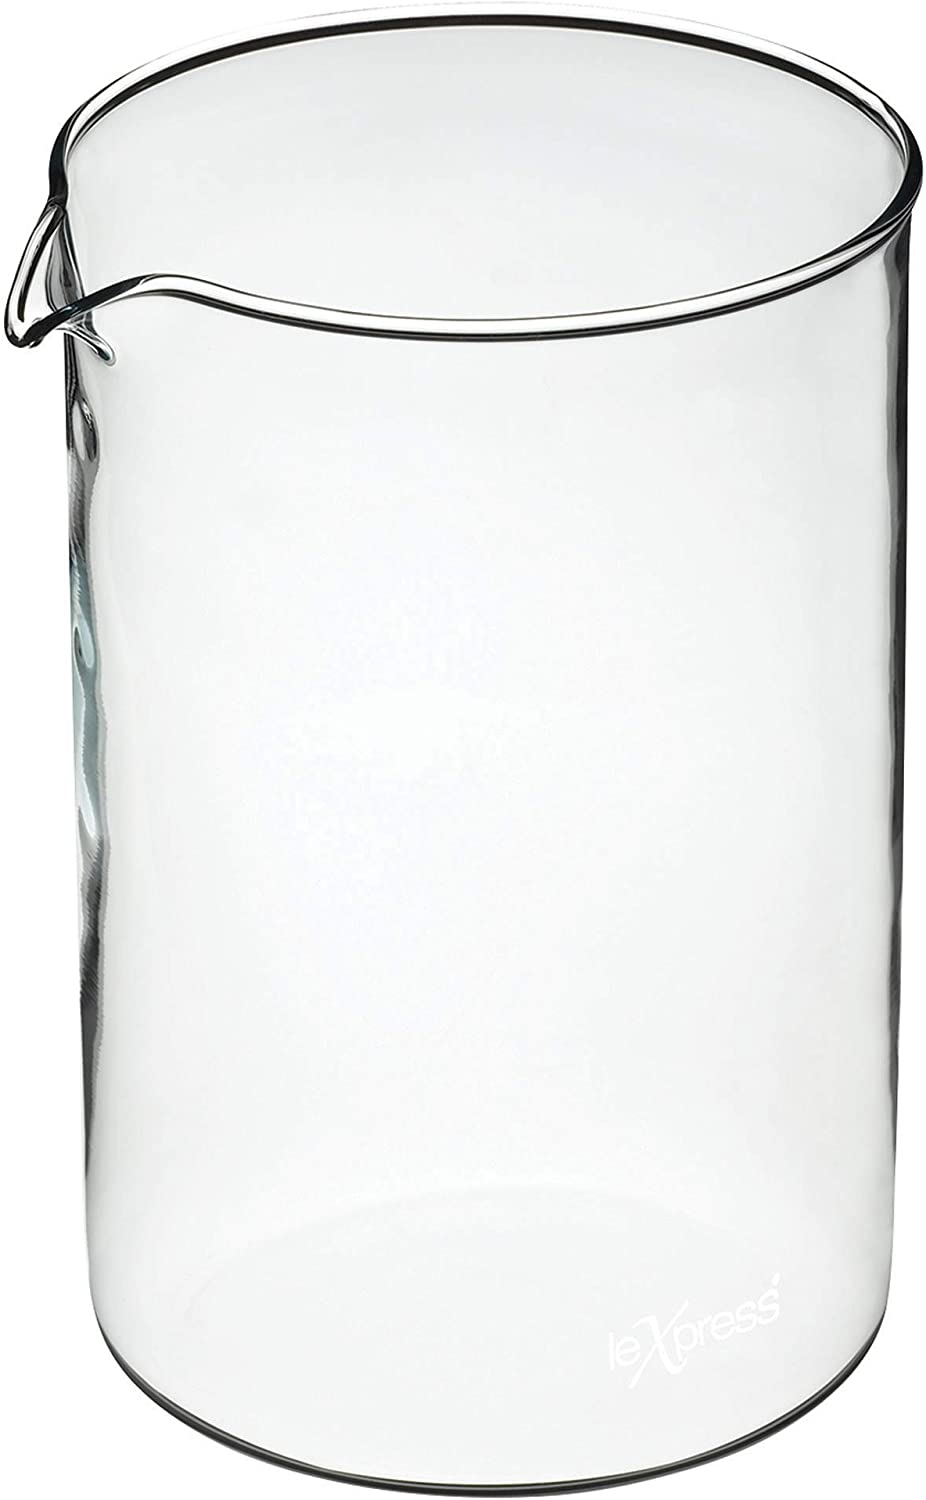 L'express 12 Cup Cafetiere Replacement Glass